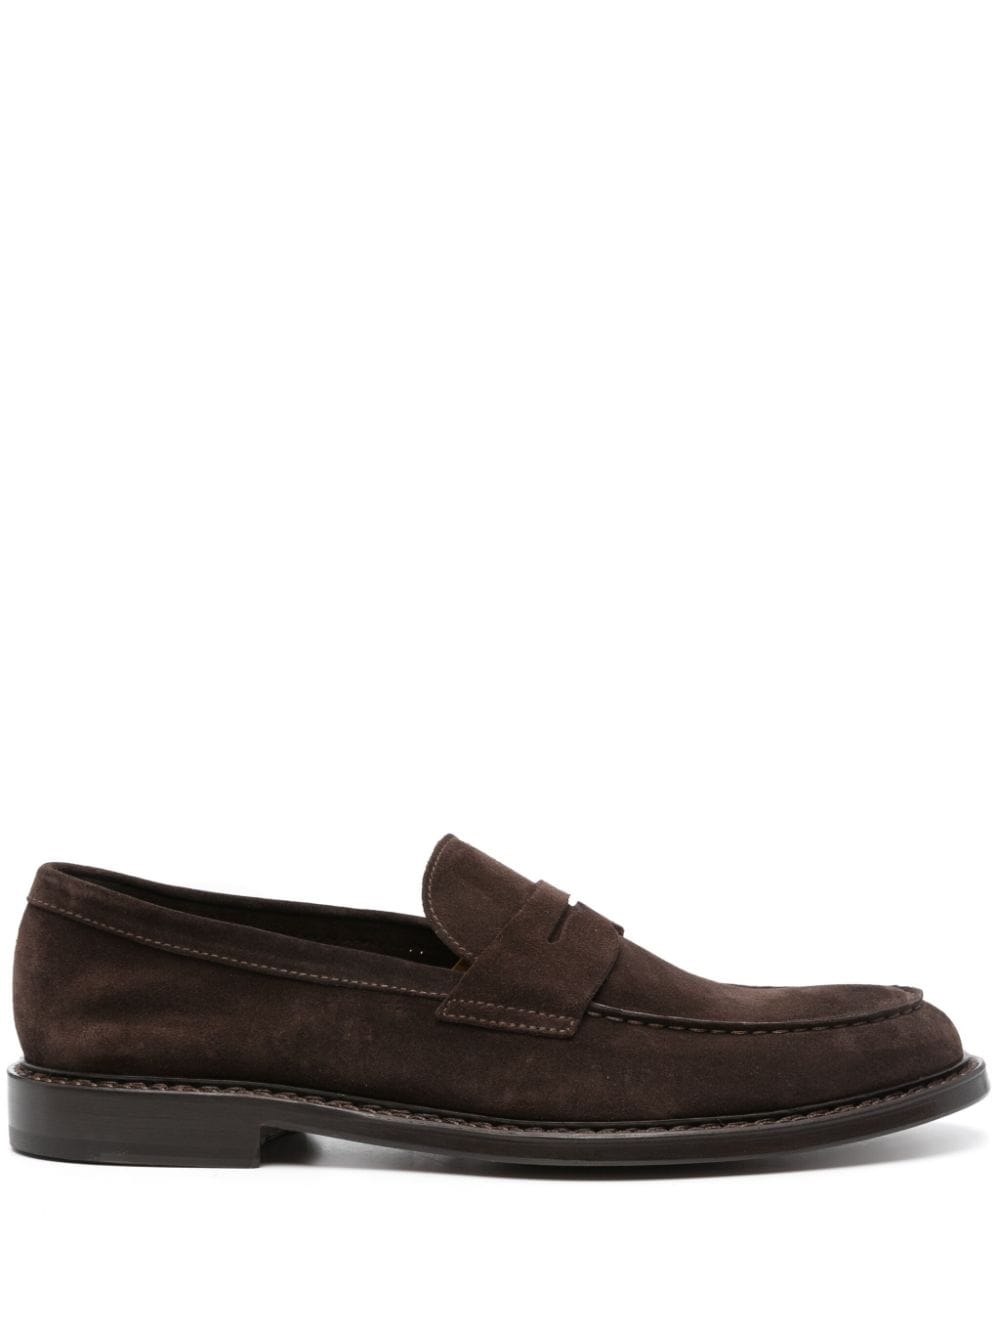 Doucal's penny-slot suede loafers - Brown von Doucal's